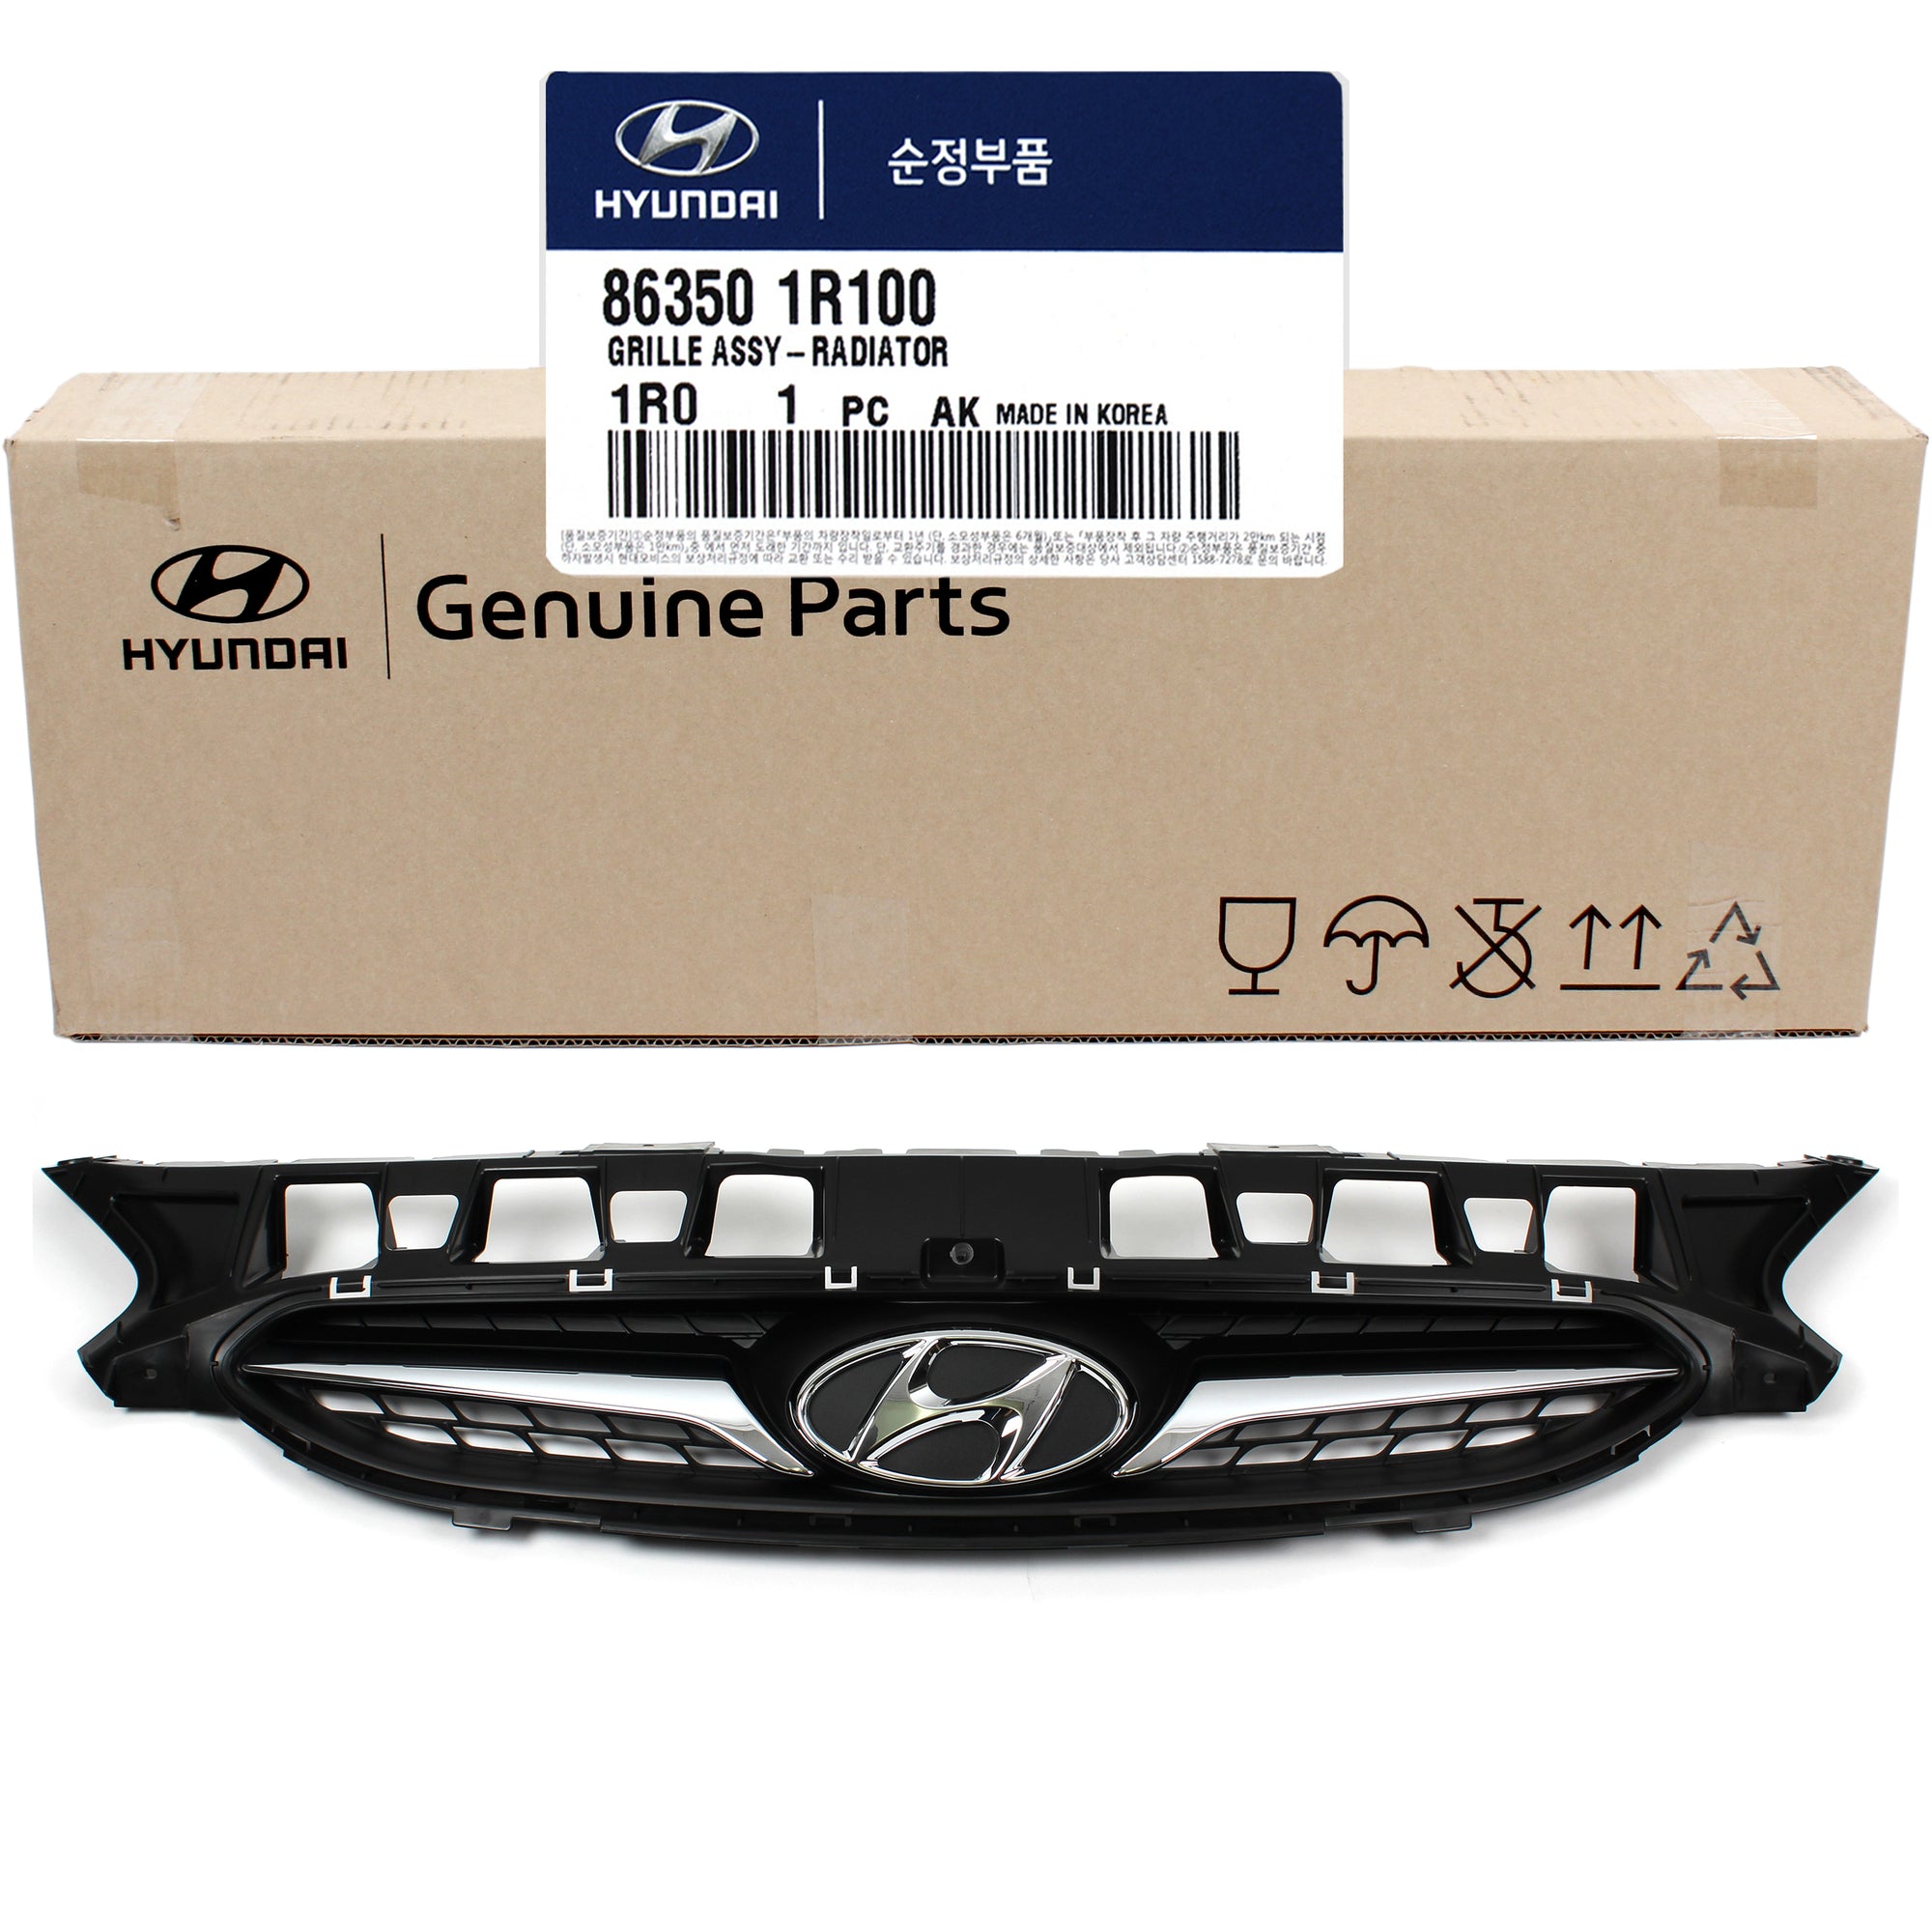 GENUINE Radiator Grille & Upper Cover for 2012-2014 Hyundai Accent 863501R100